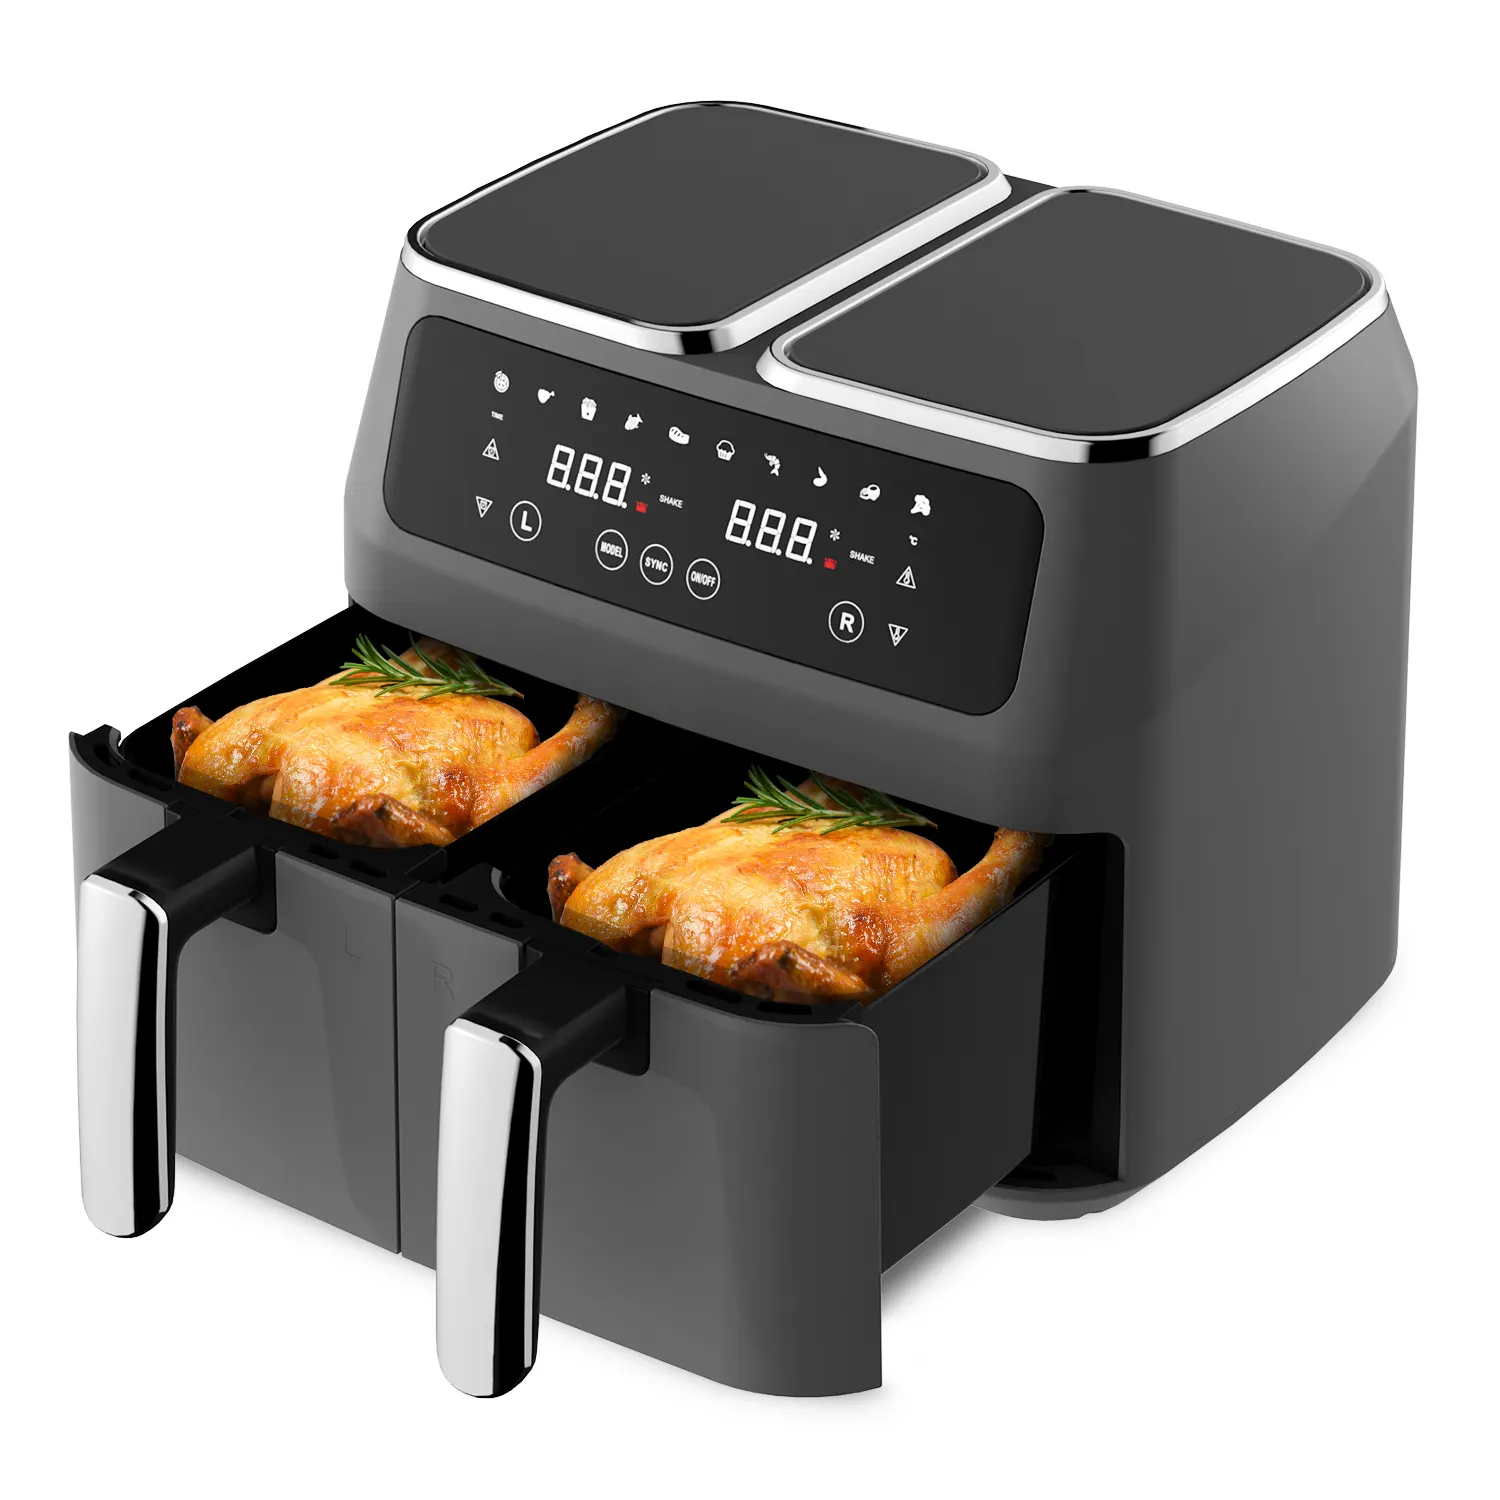 New Dual Basket Air Fryer with Two Cooking Zones Oil Free LED Display Digital large Capacity freidora de aire